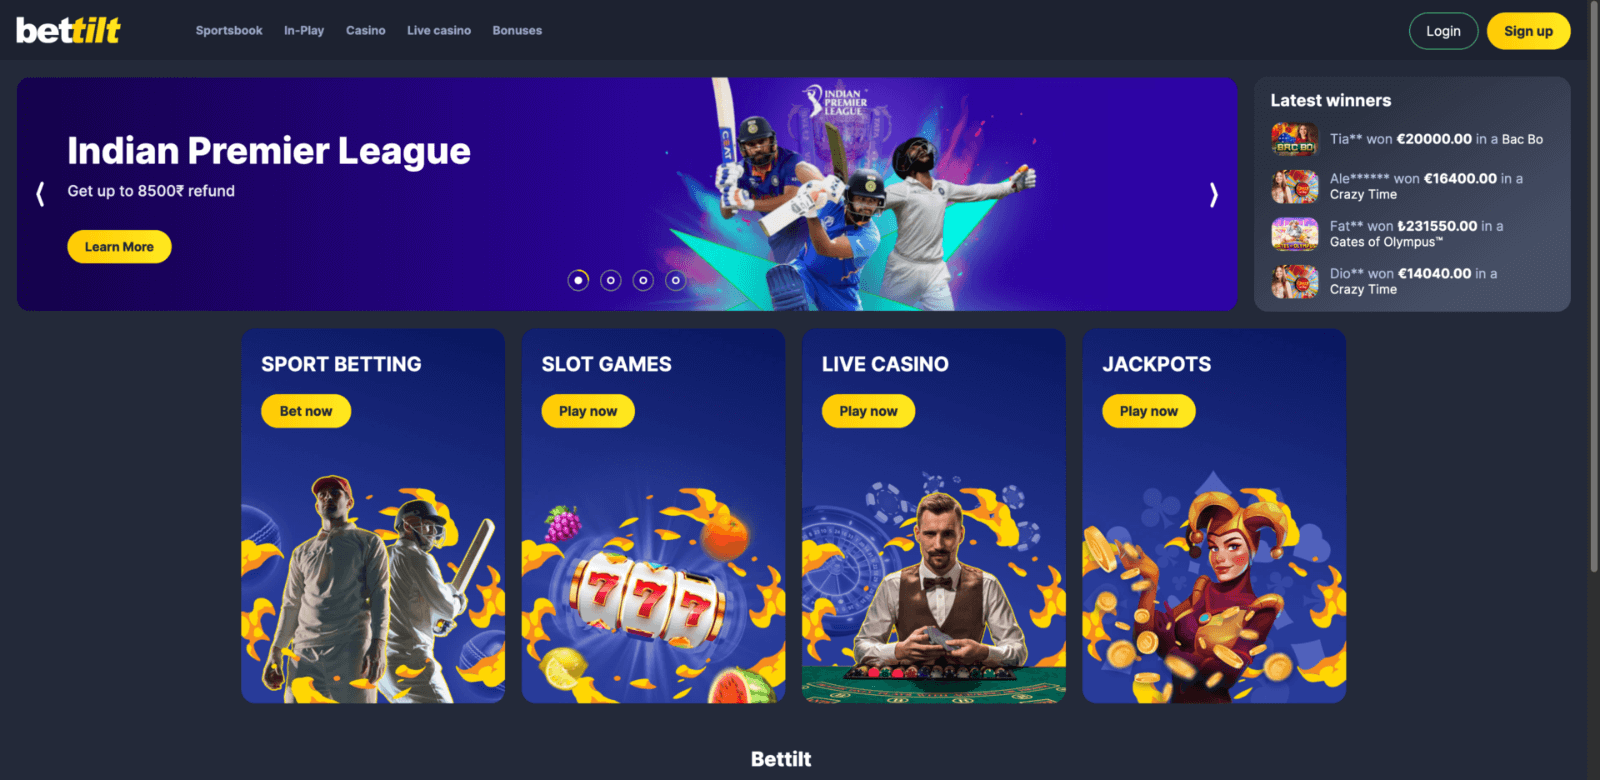 the homepage of bettilt, a popular betting company in india